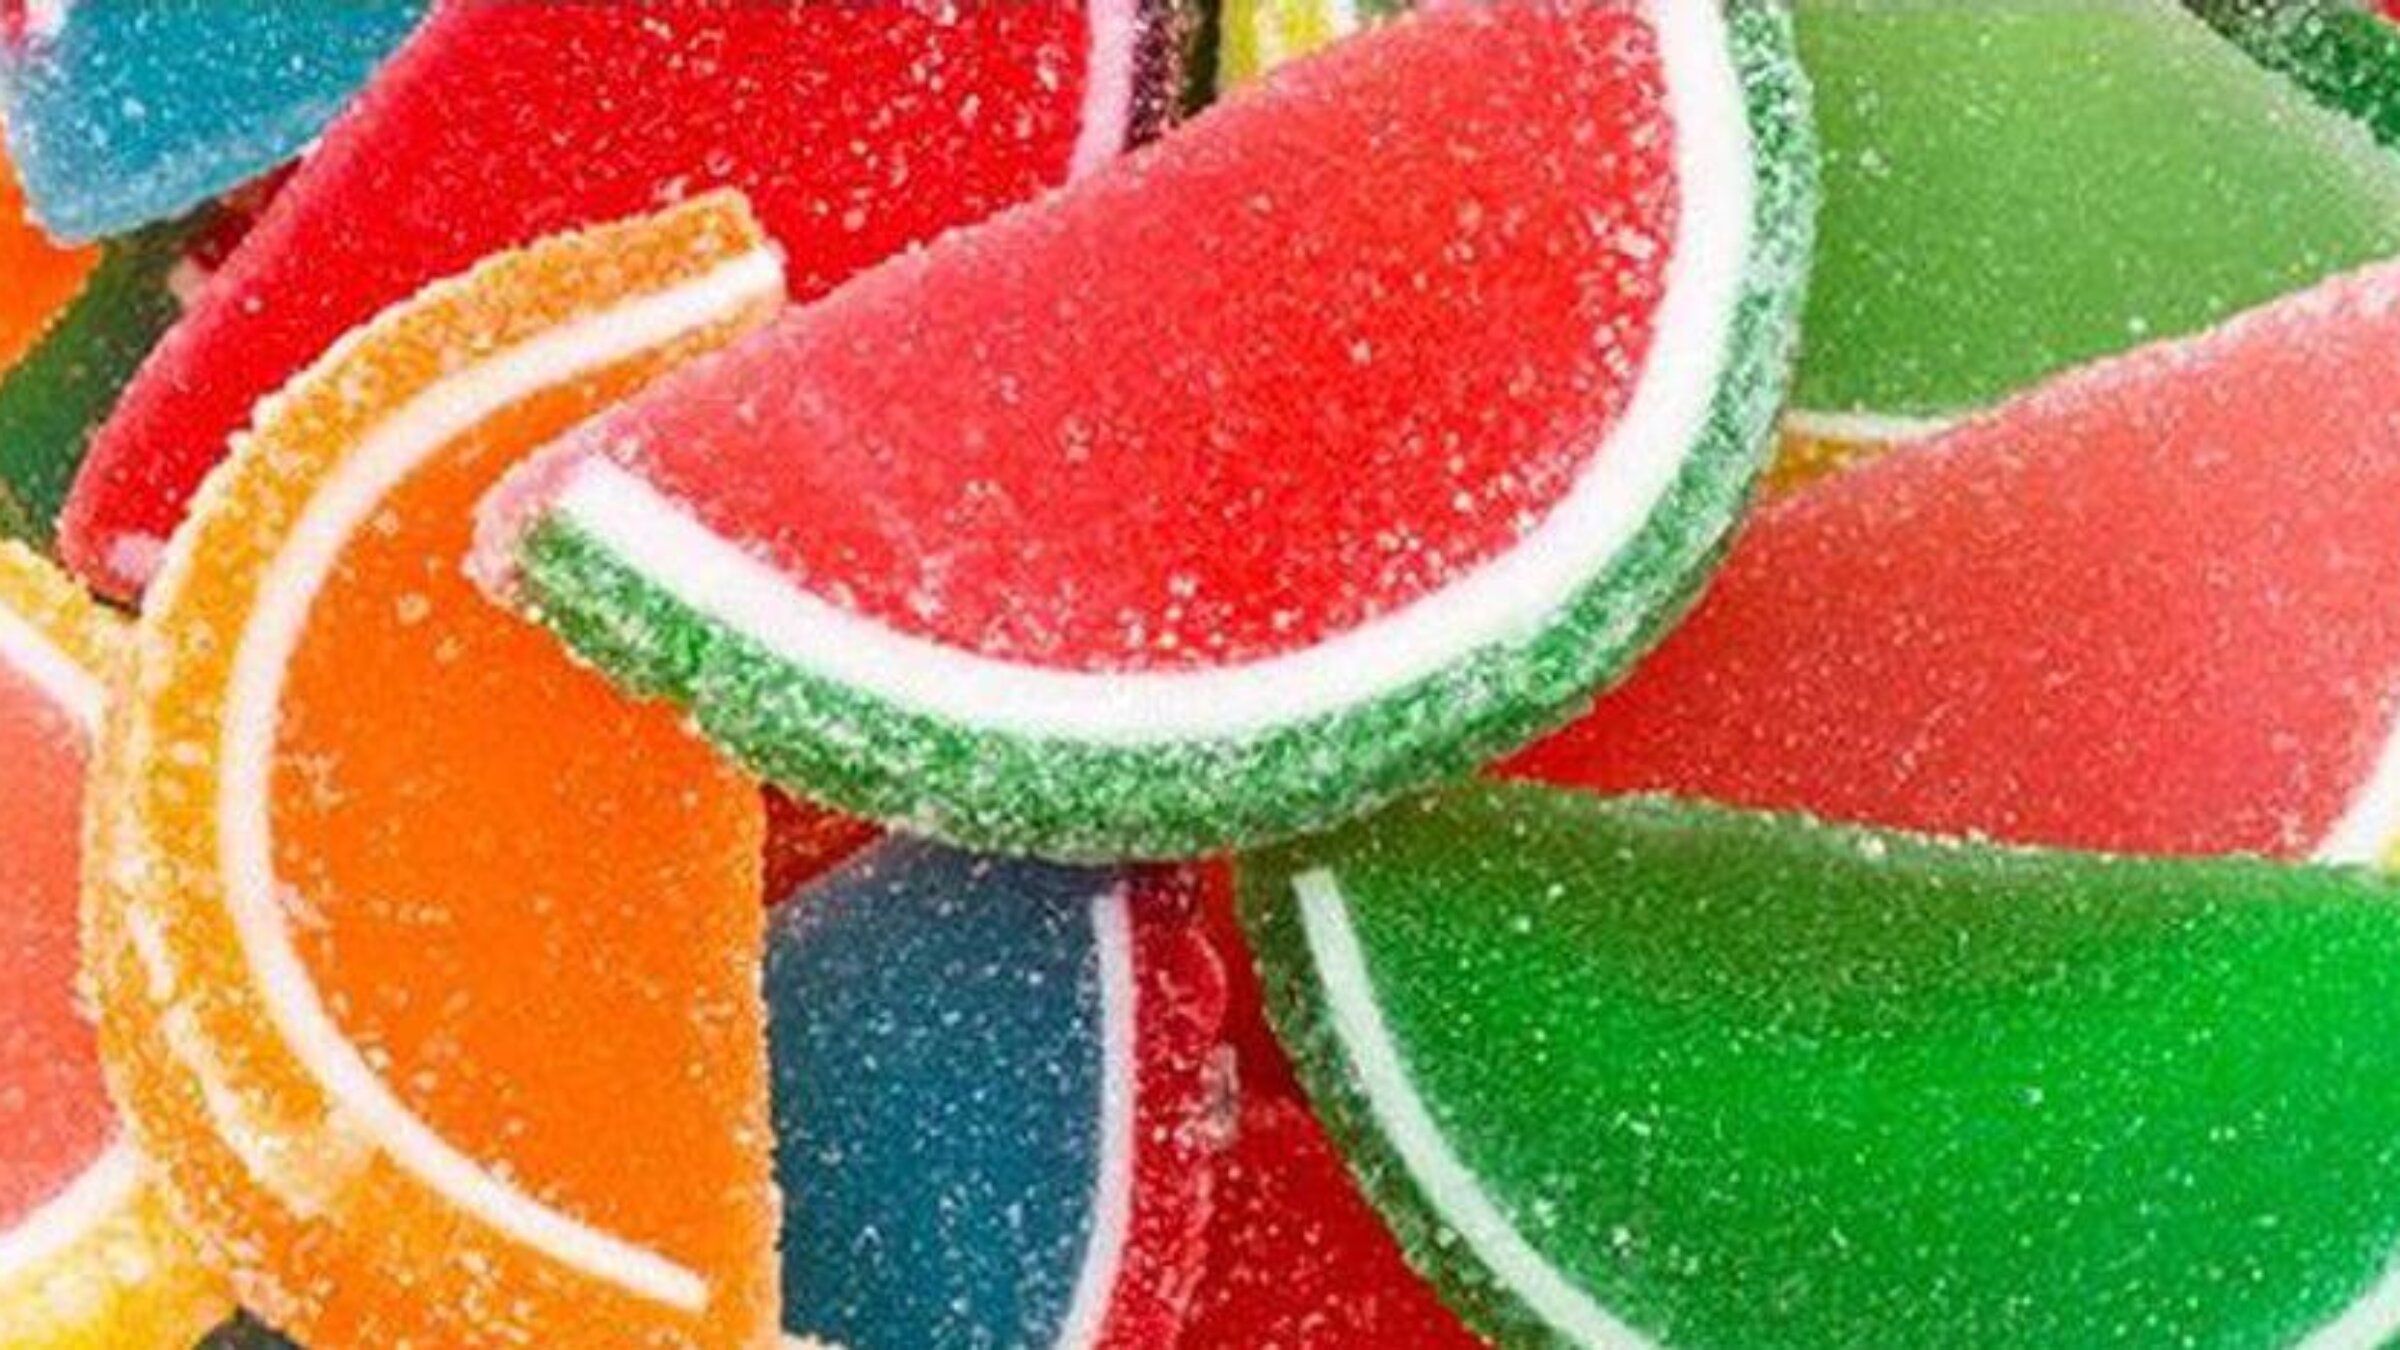 Fruit Slices - Jelly Candy - Chocolates & Sweets 